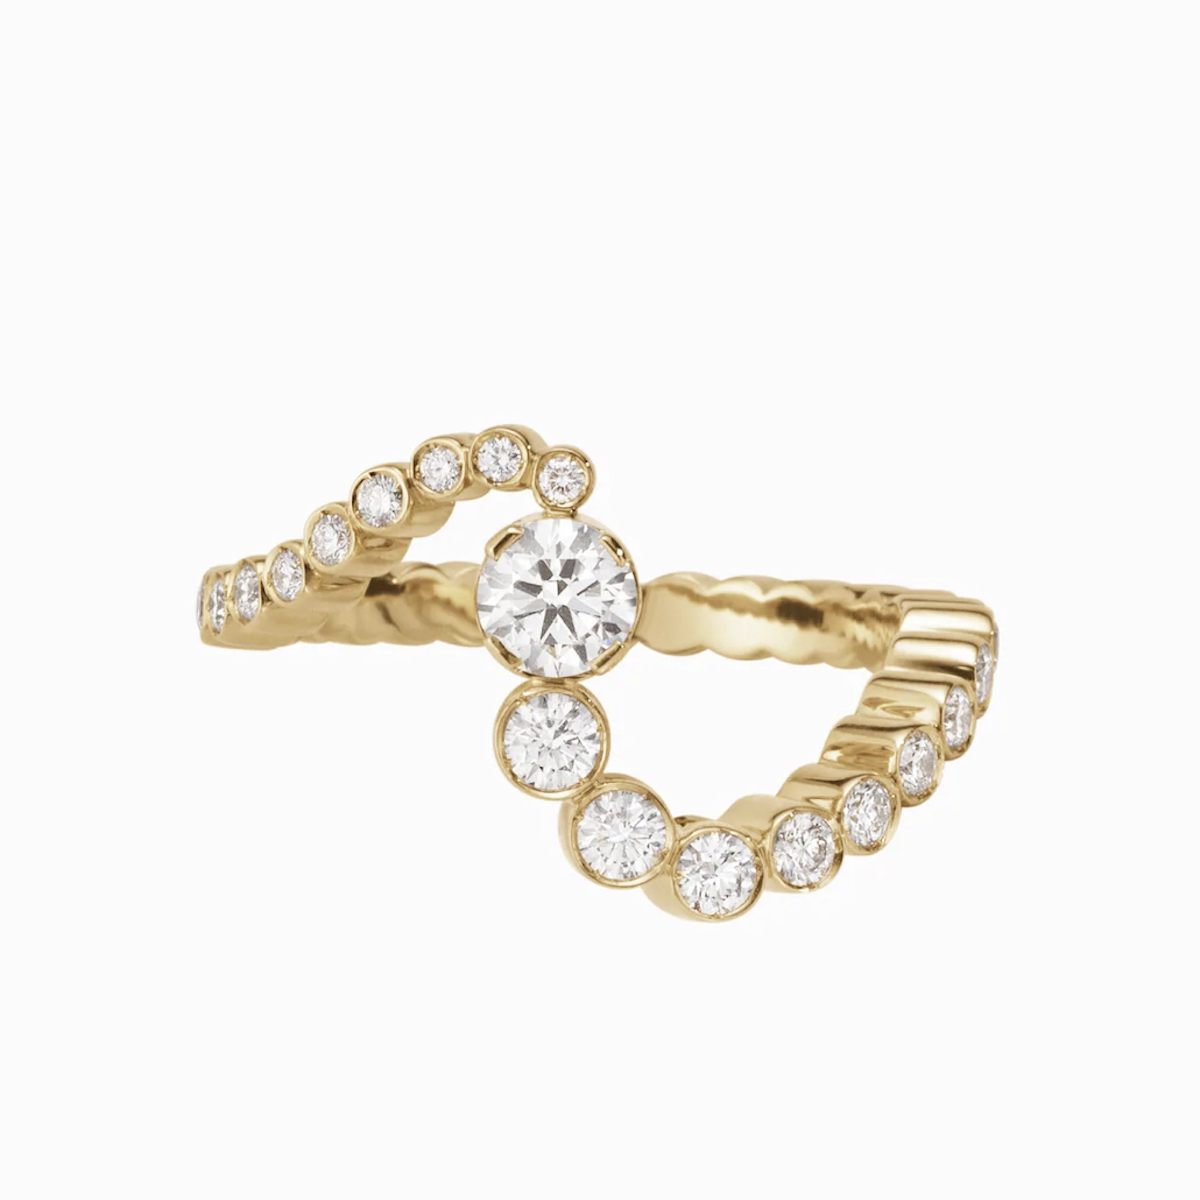 5 Engagement Ring Designers to Know in 2023